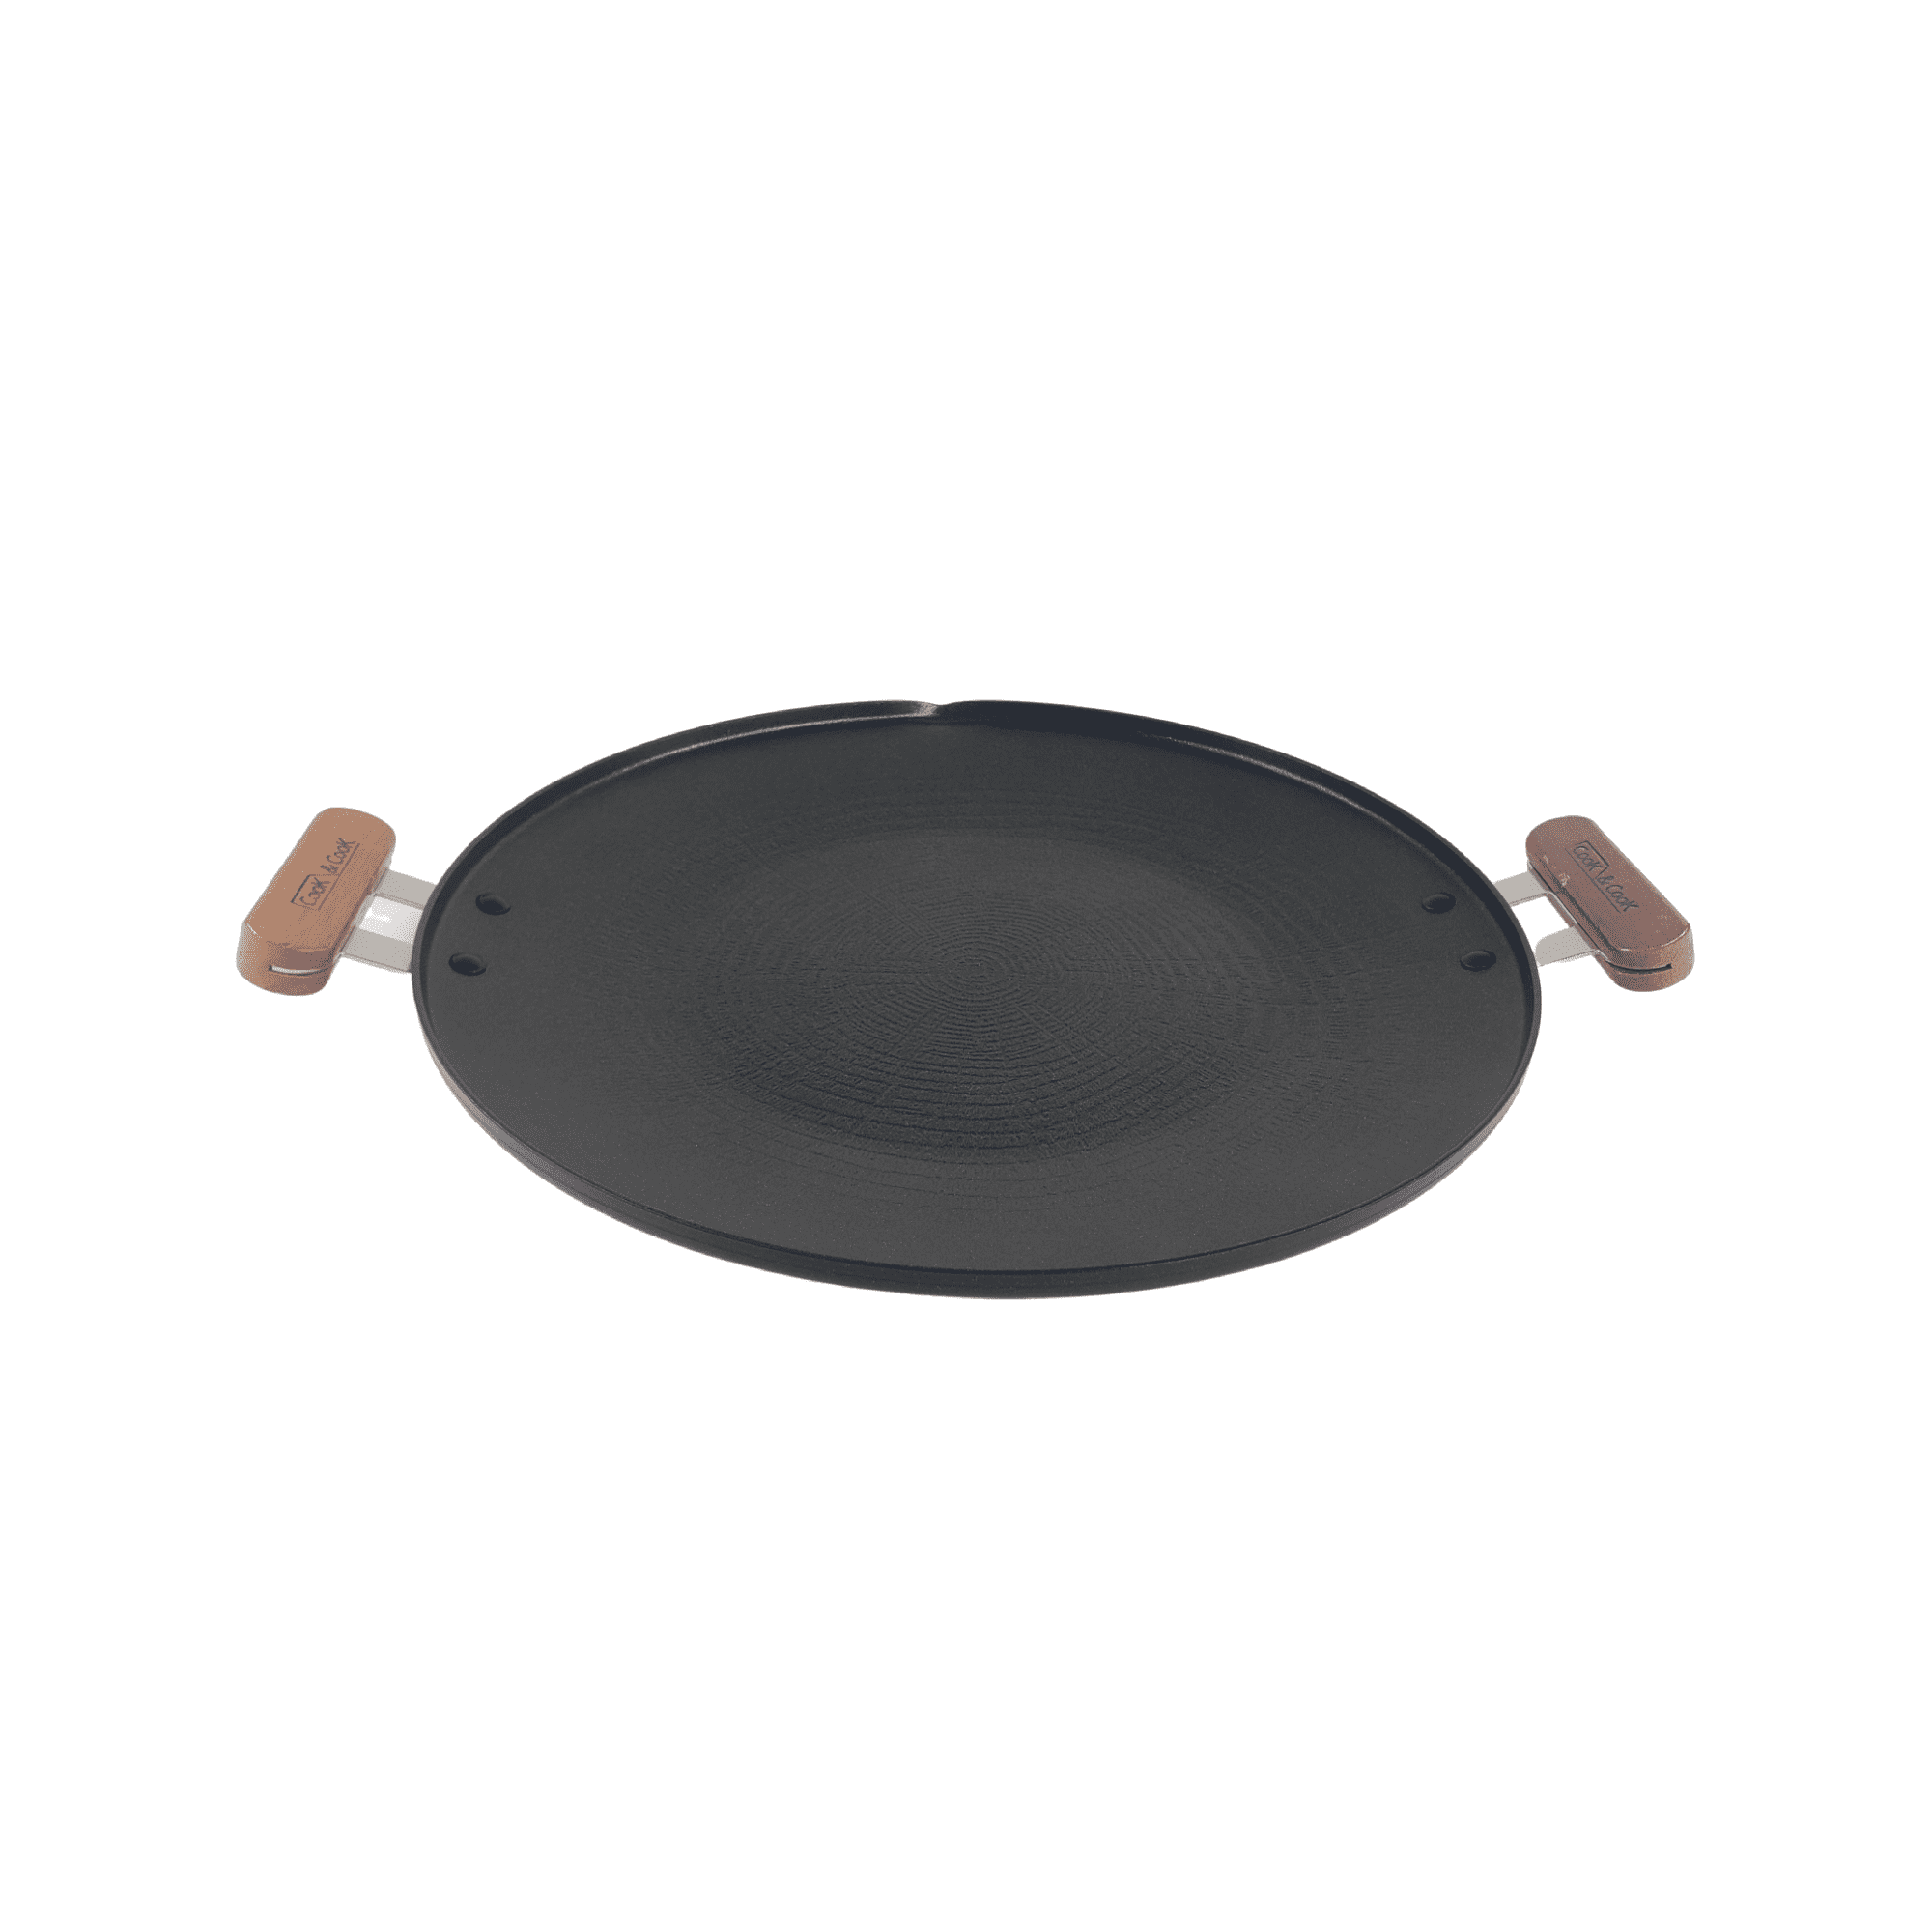  Jiawu Korean Grill Pan, 6 Layer Coating Nonstick BBQ Grill,  Round Cast Aluminum Griddle Pan, Pancake Griddle Grill for Induction Cooktop,  Stove, Oven, Versatile Indoor Outdoor Cookware (30cm) : Home 